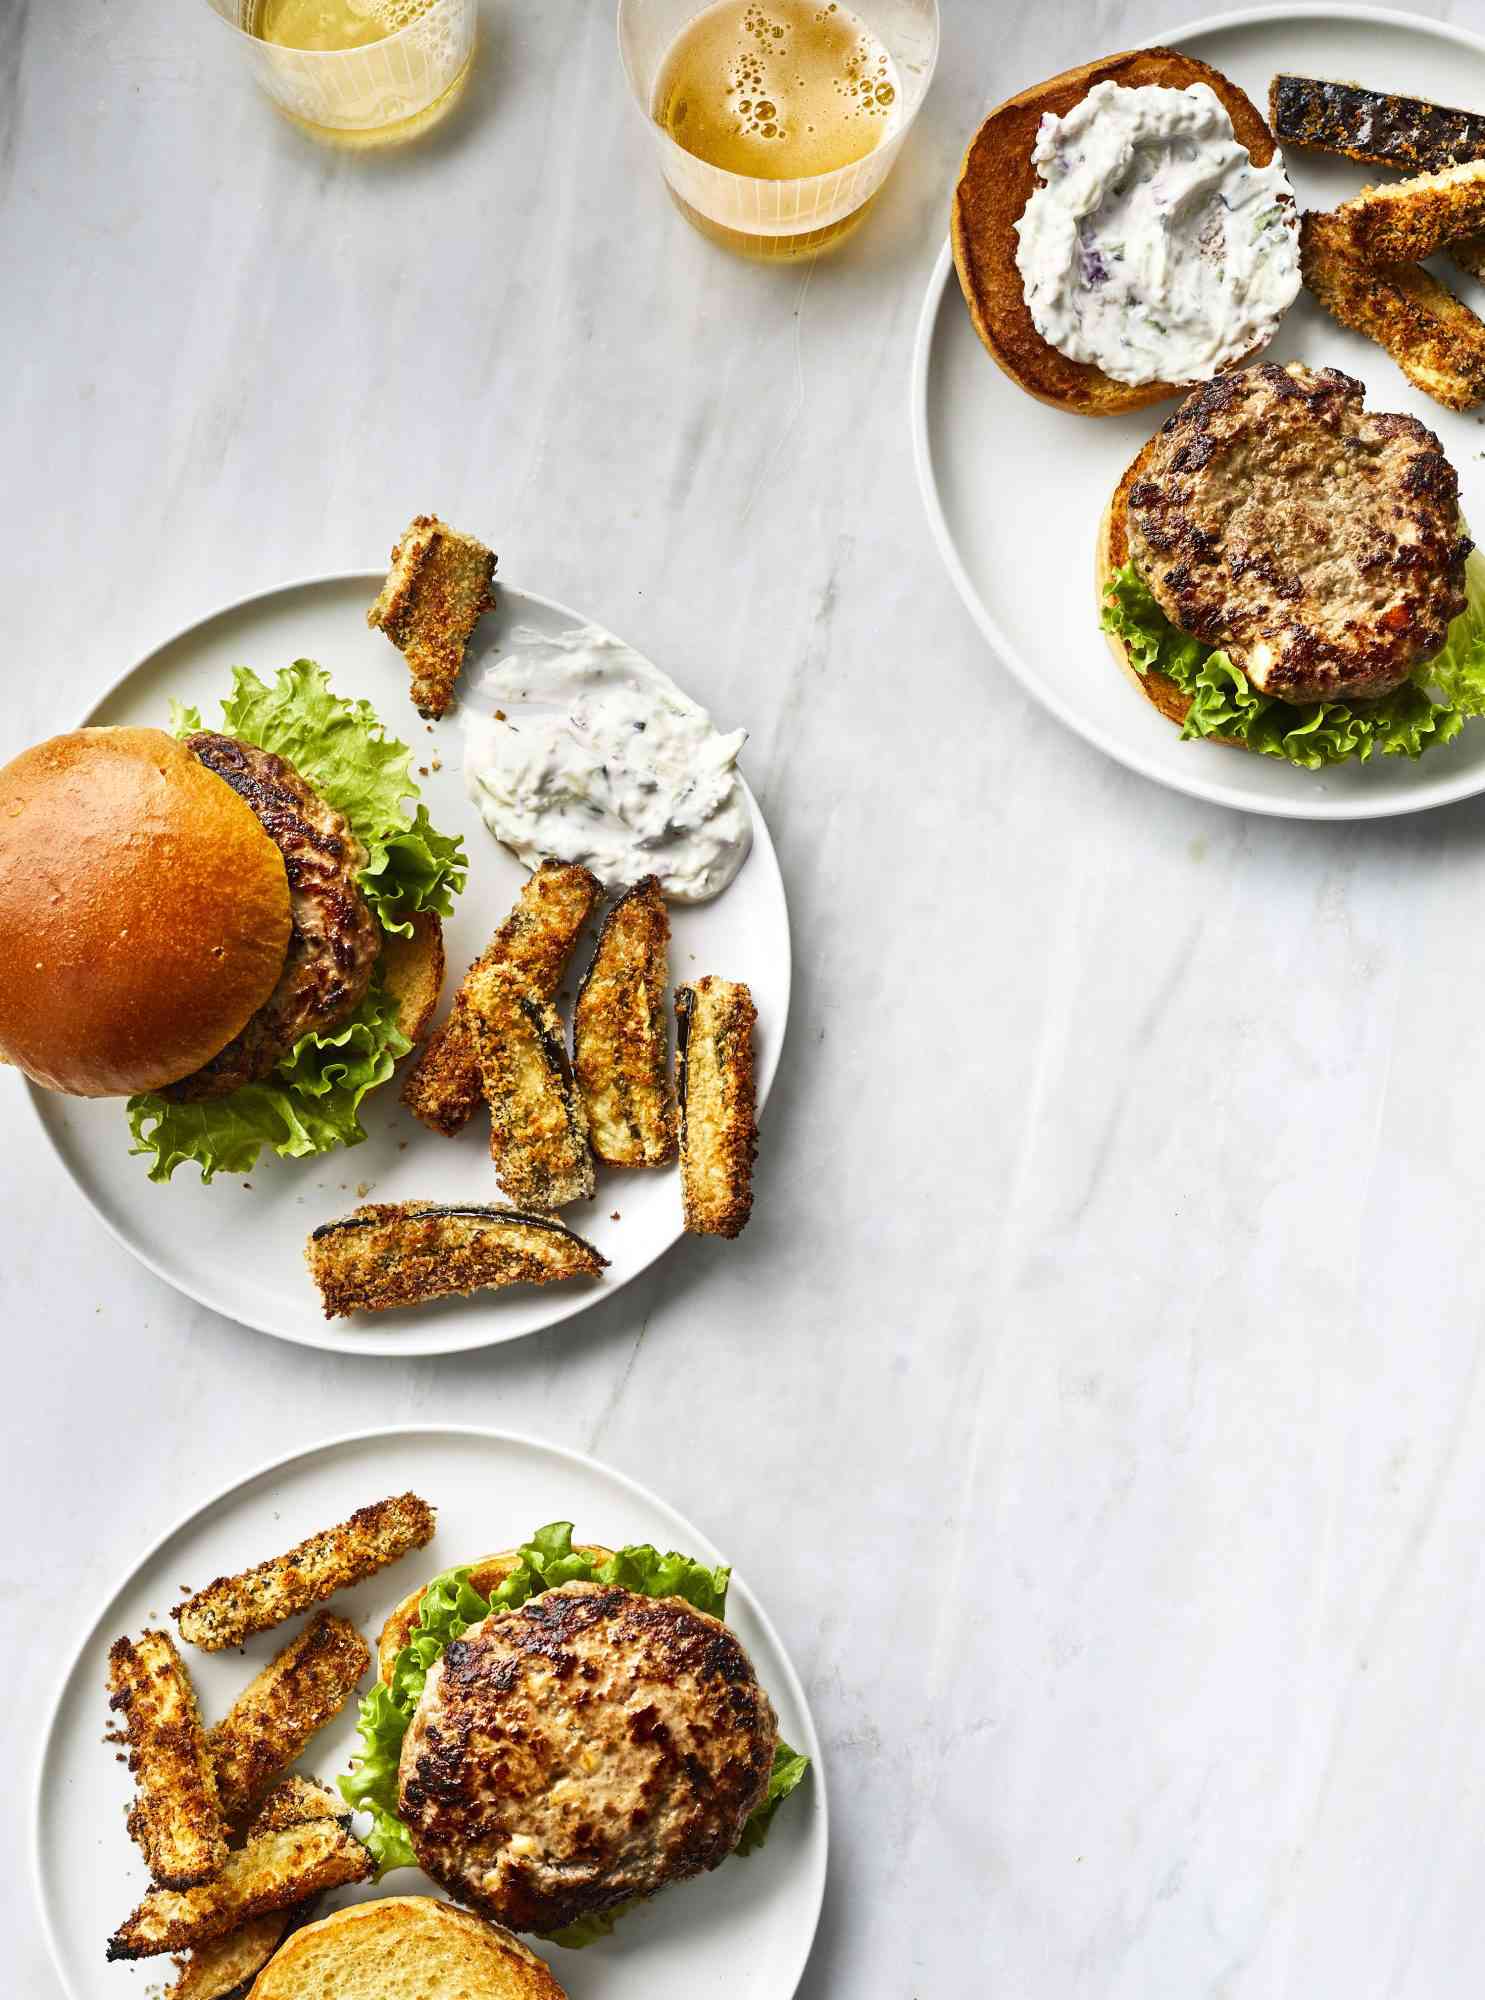 Greek Lamb Burgers With Baked Eggplant Fries 